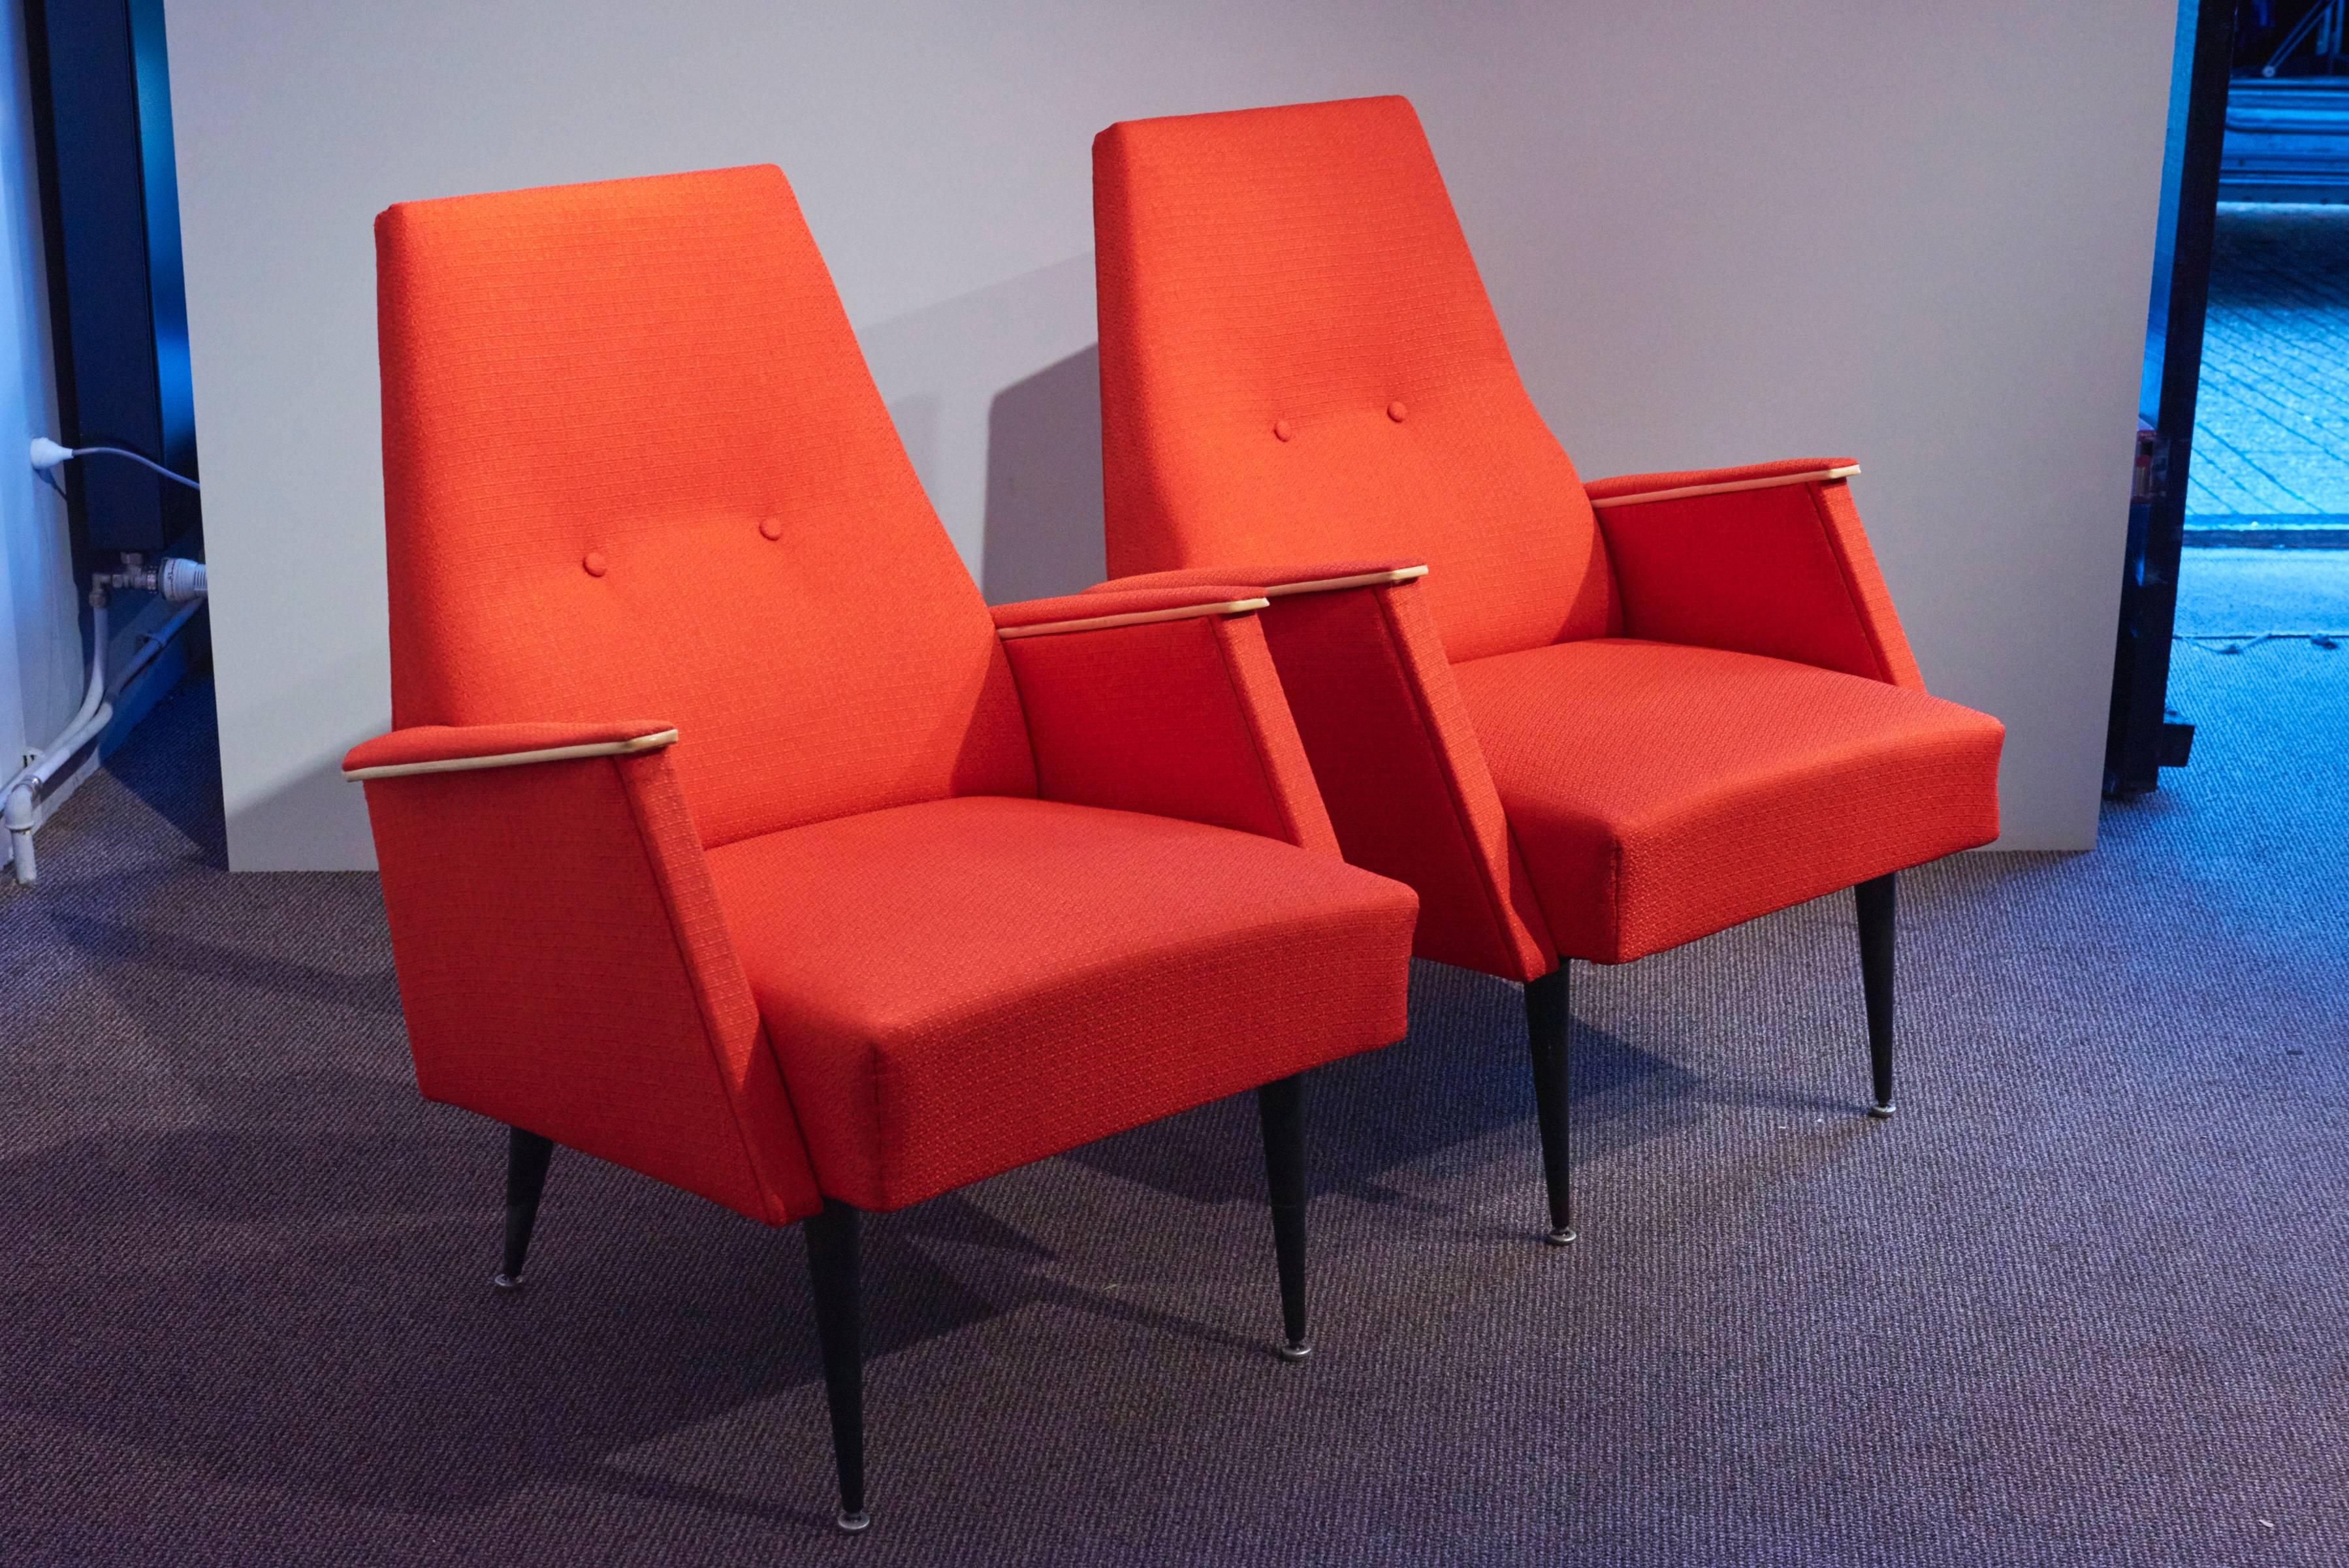 A very elegant pair of armchairs designed in the 1960s.
The metallic feet are black painted and the chairs were totally refurbished and reupholstered with a red coloured fabric.